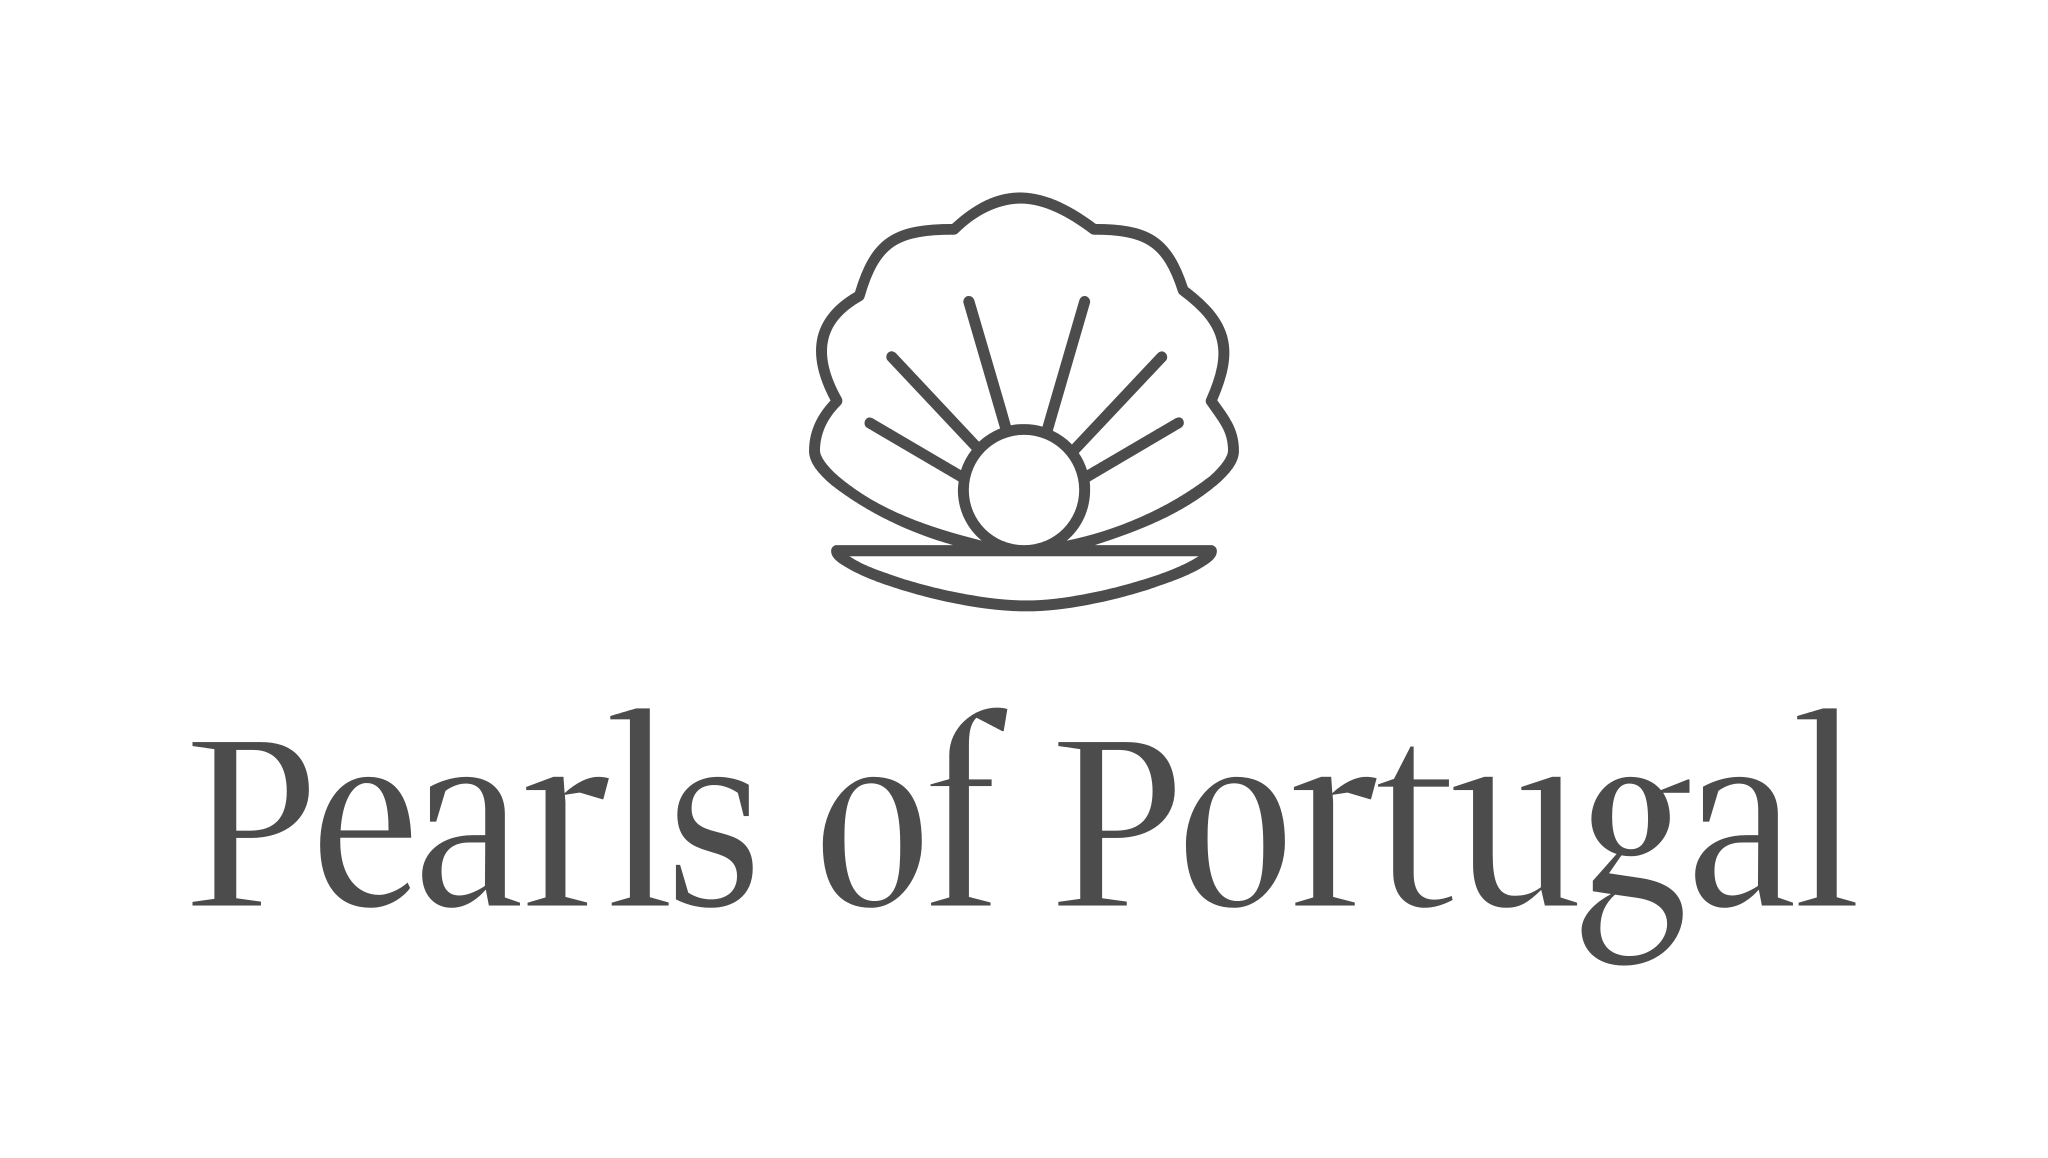 Pearls of Portugal